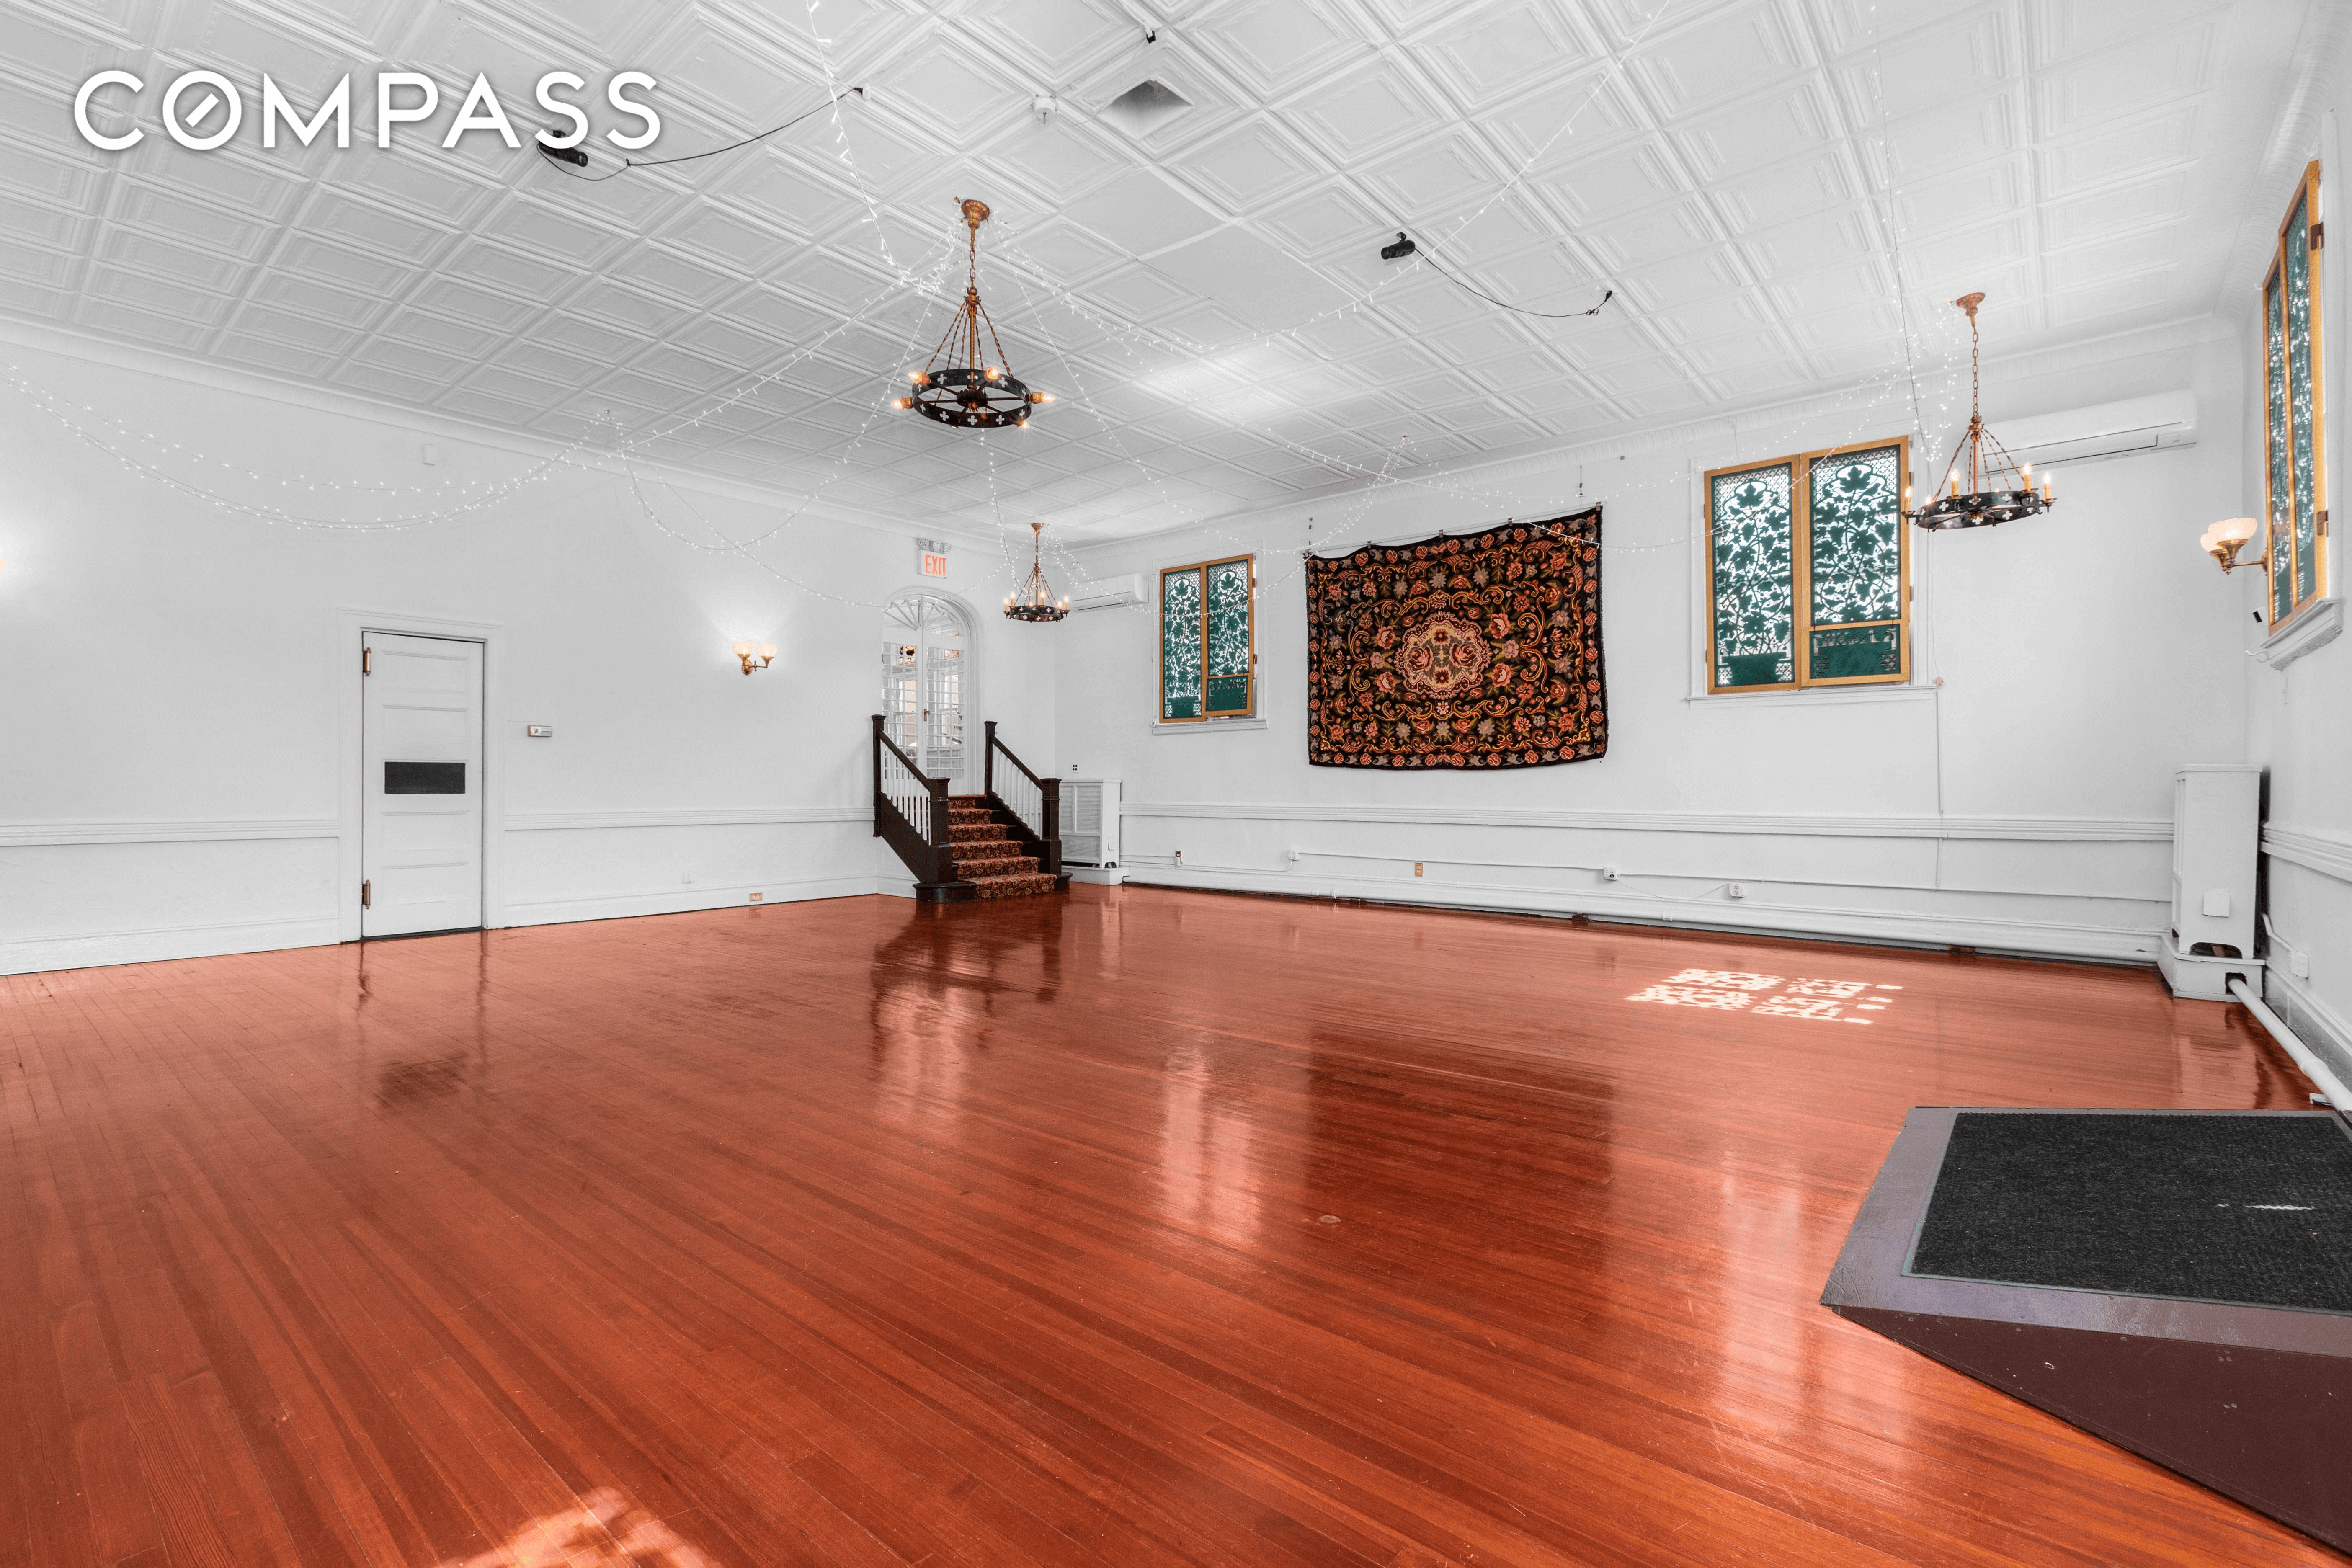 event space with tin ceiling and wood floor